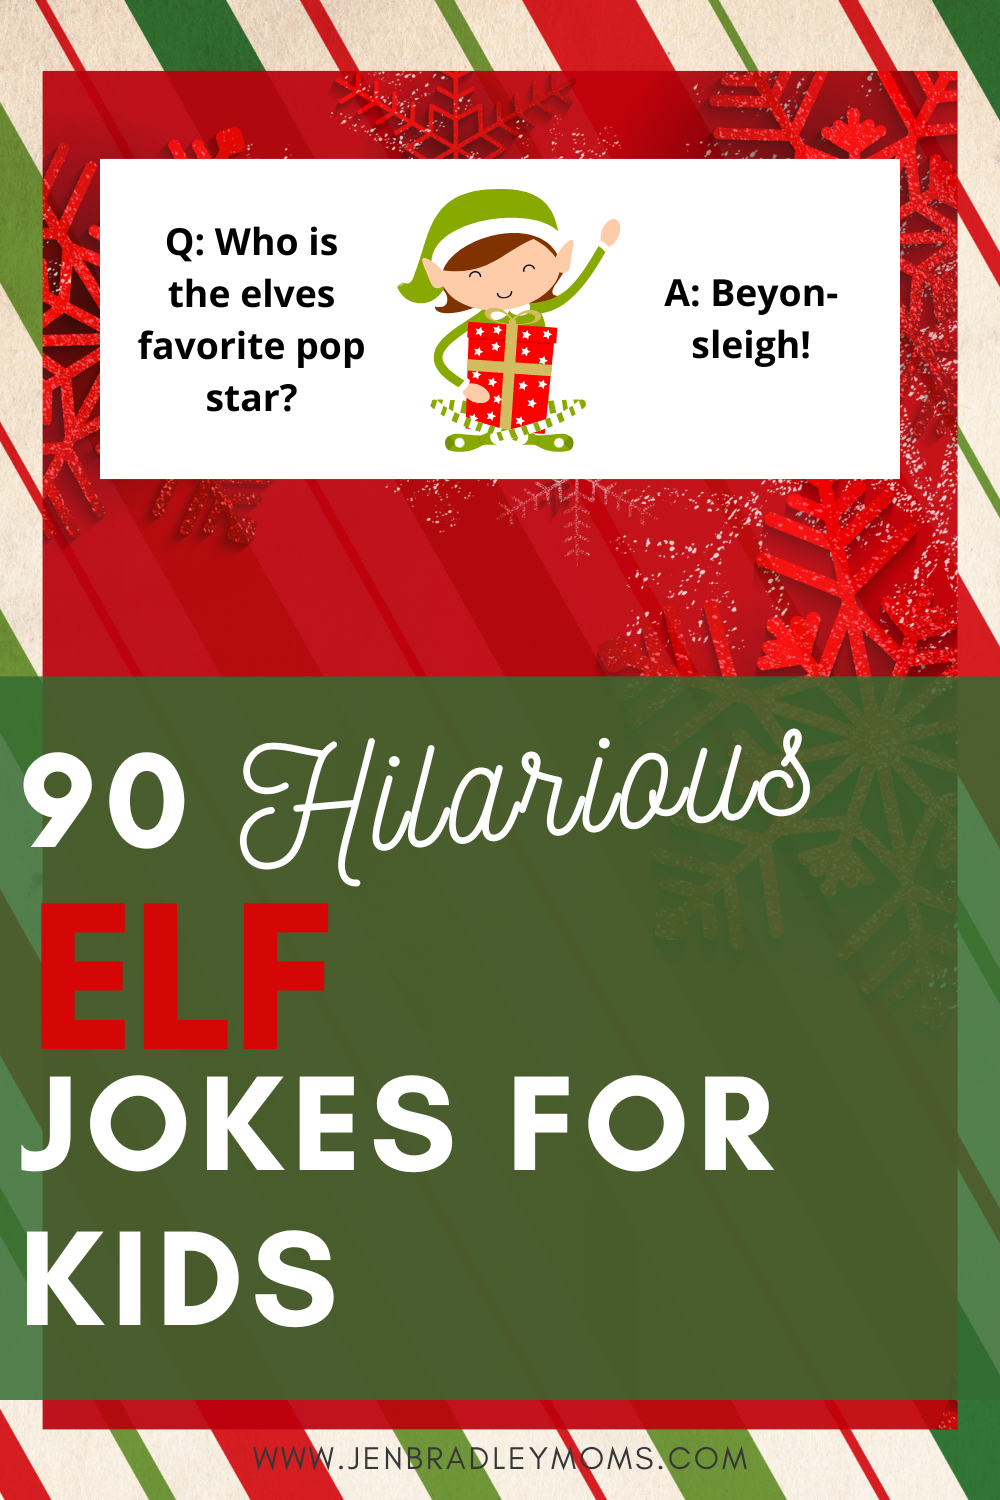 90 Jokes About Elves to Make Your Holidays Extra Merry